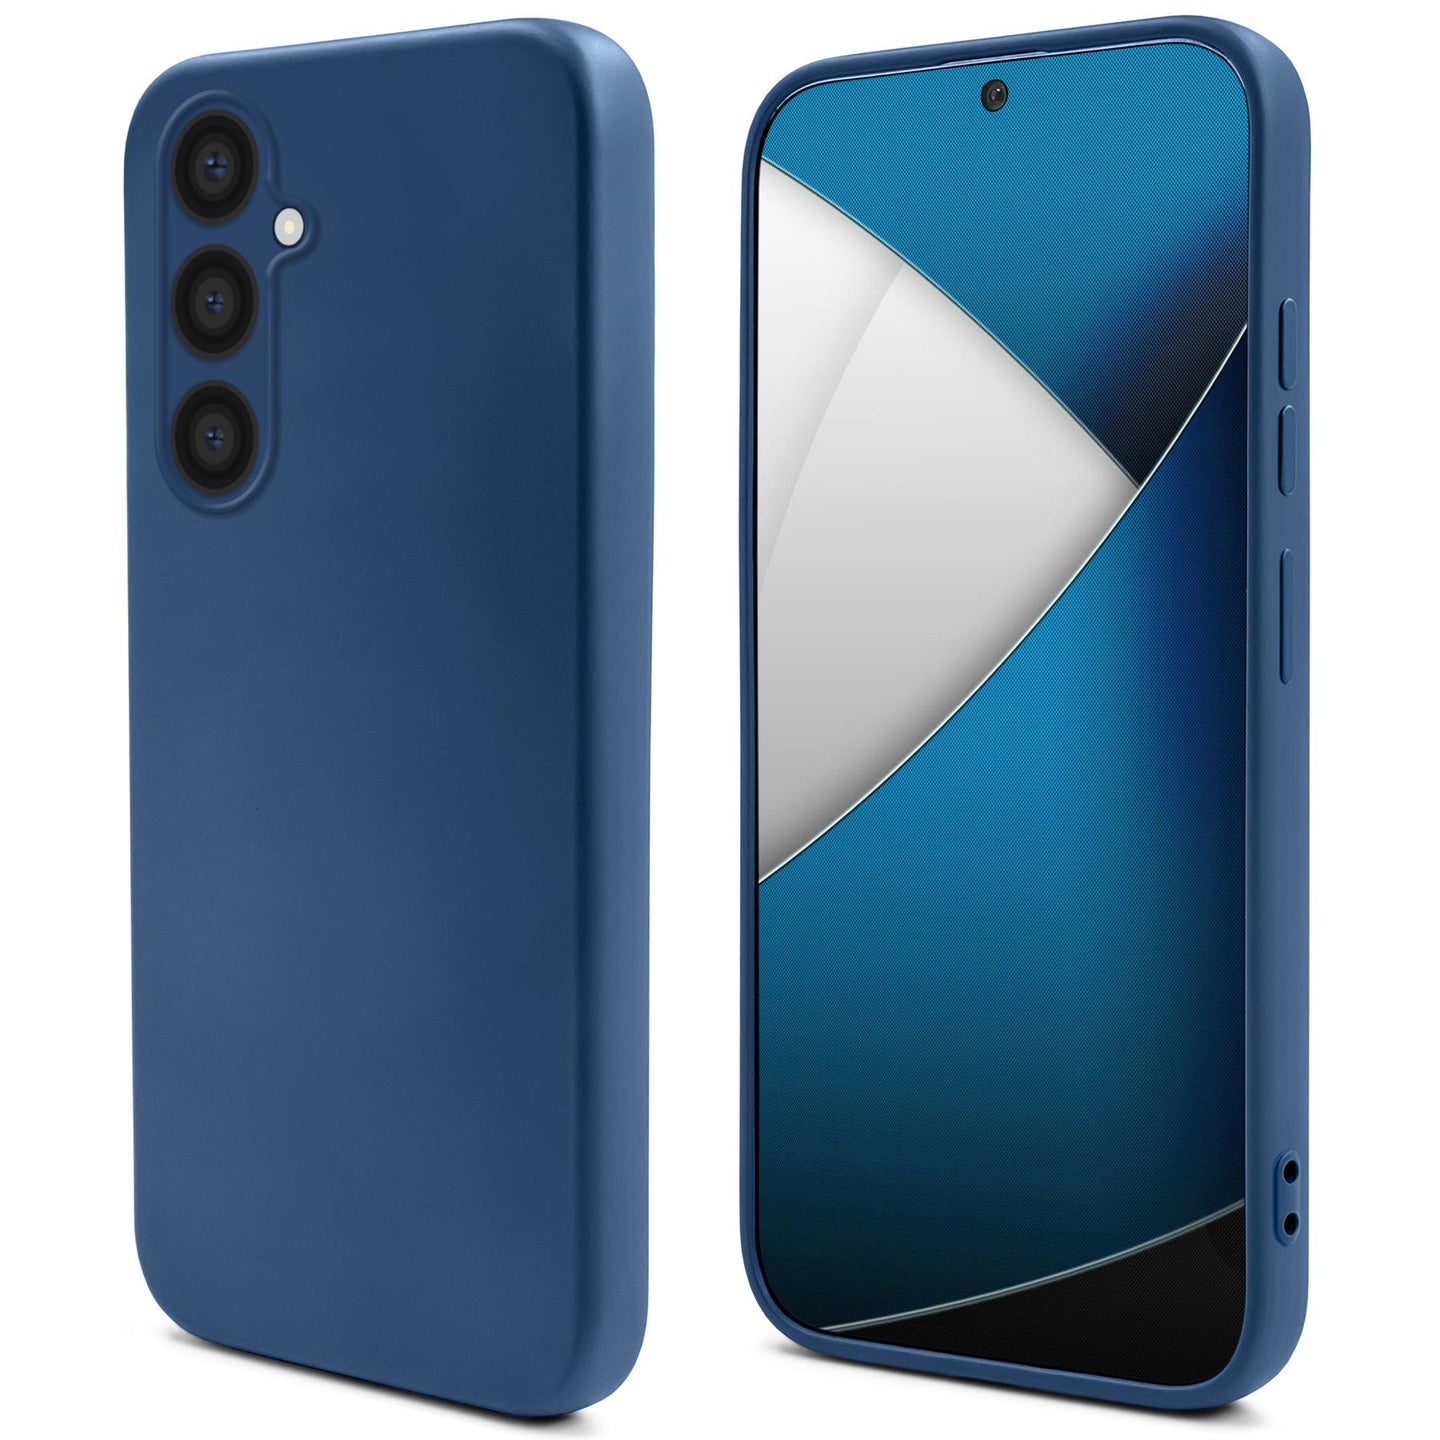 Moozy Lifestyle. Silicone Case for Samsung A54 5G, Midnight Blue - Liquid Silicone Lightweight Cover with Matte Finish and Soft Microfiber Lining, Premium Silicone Case